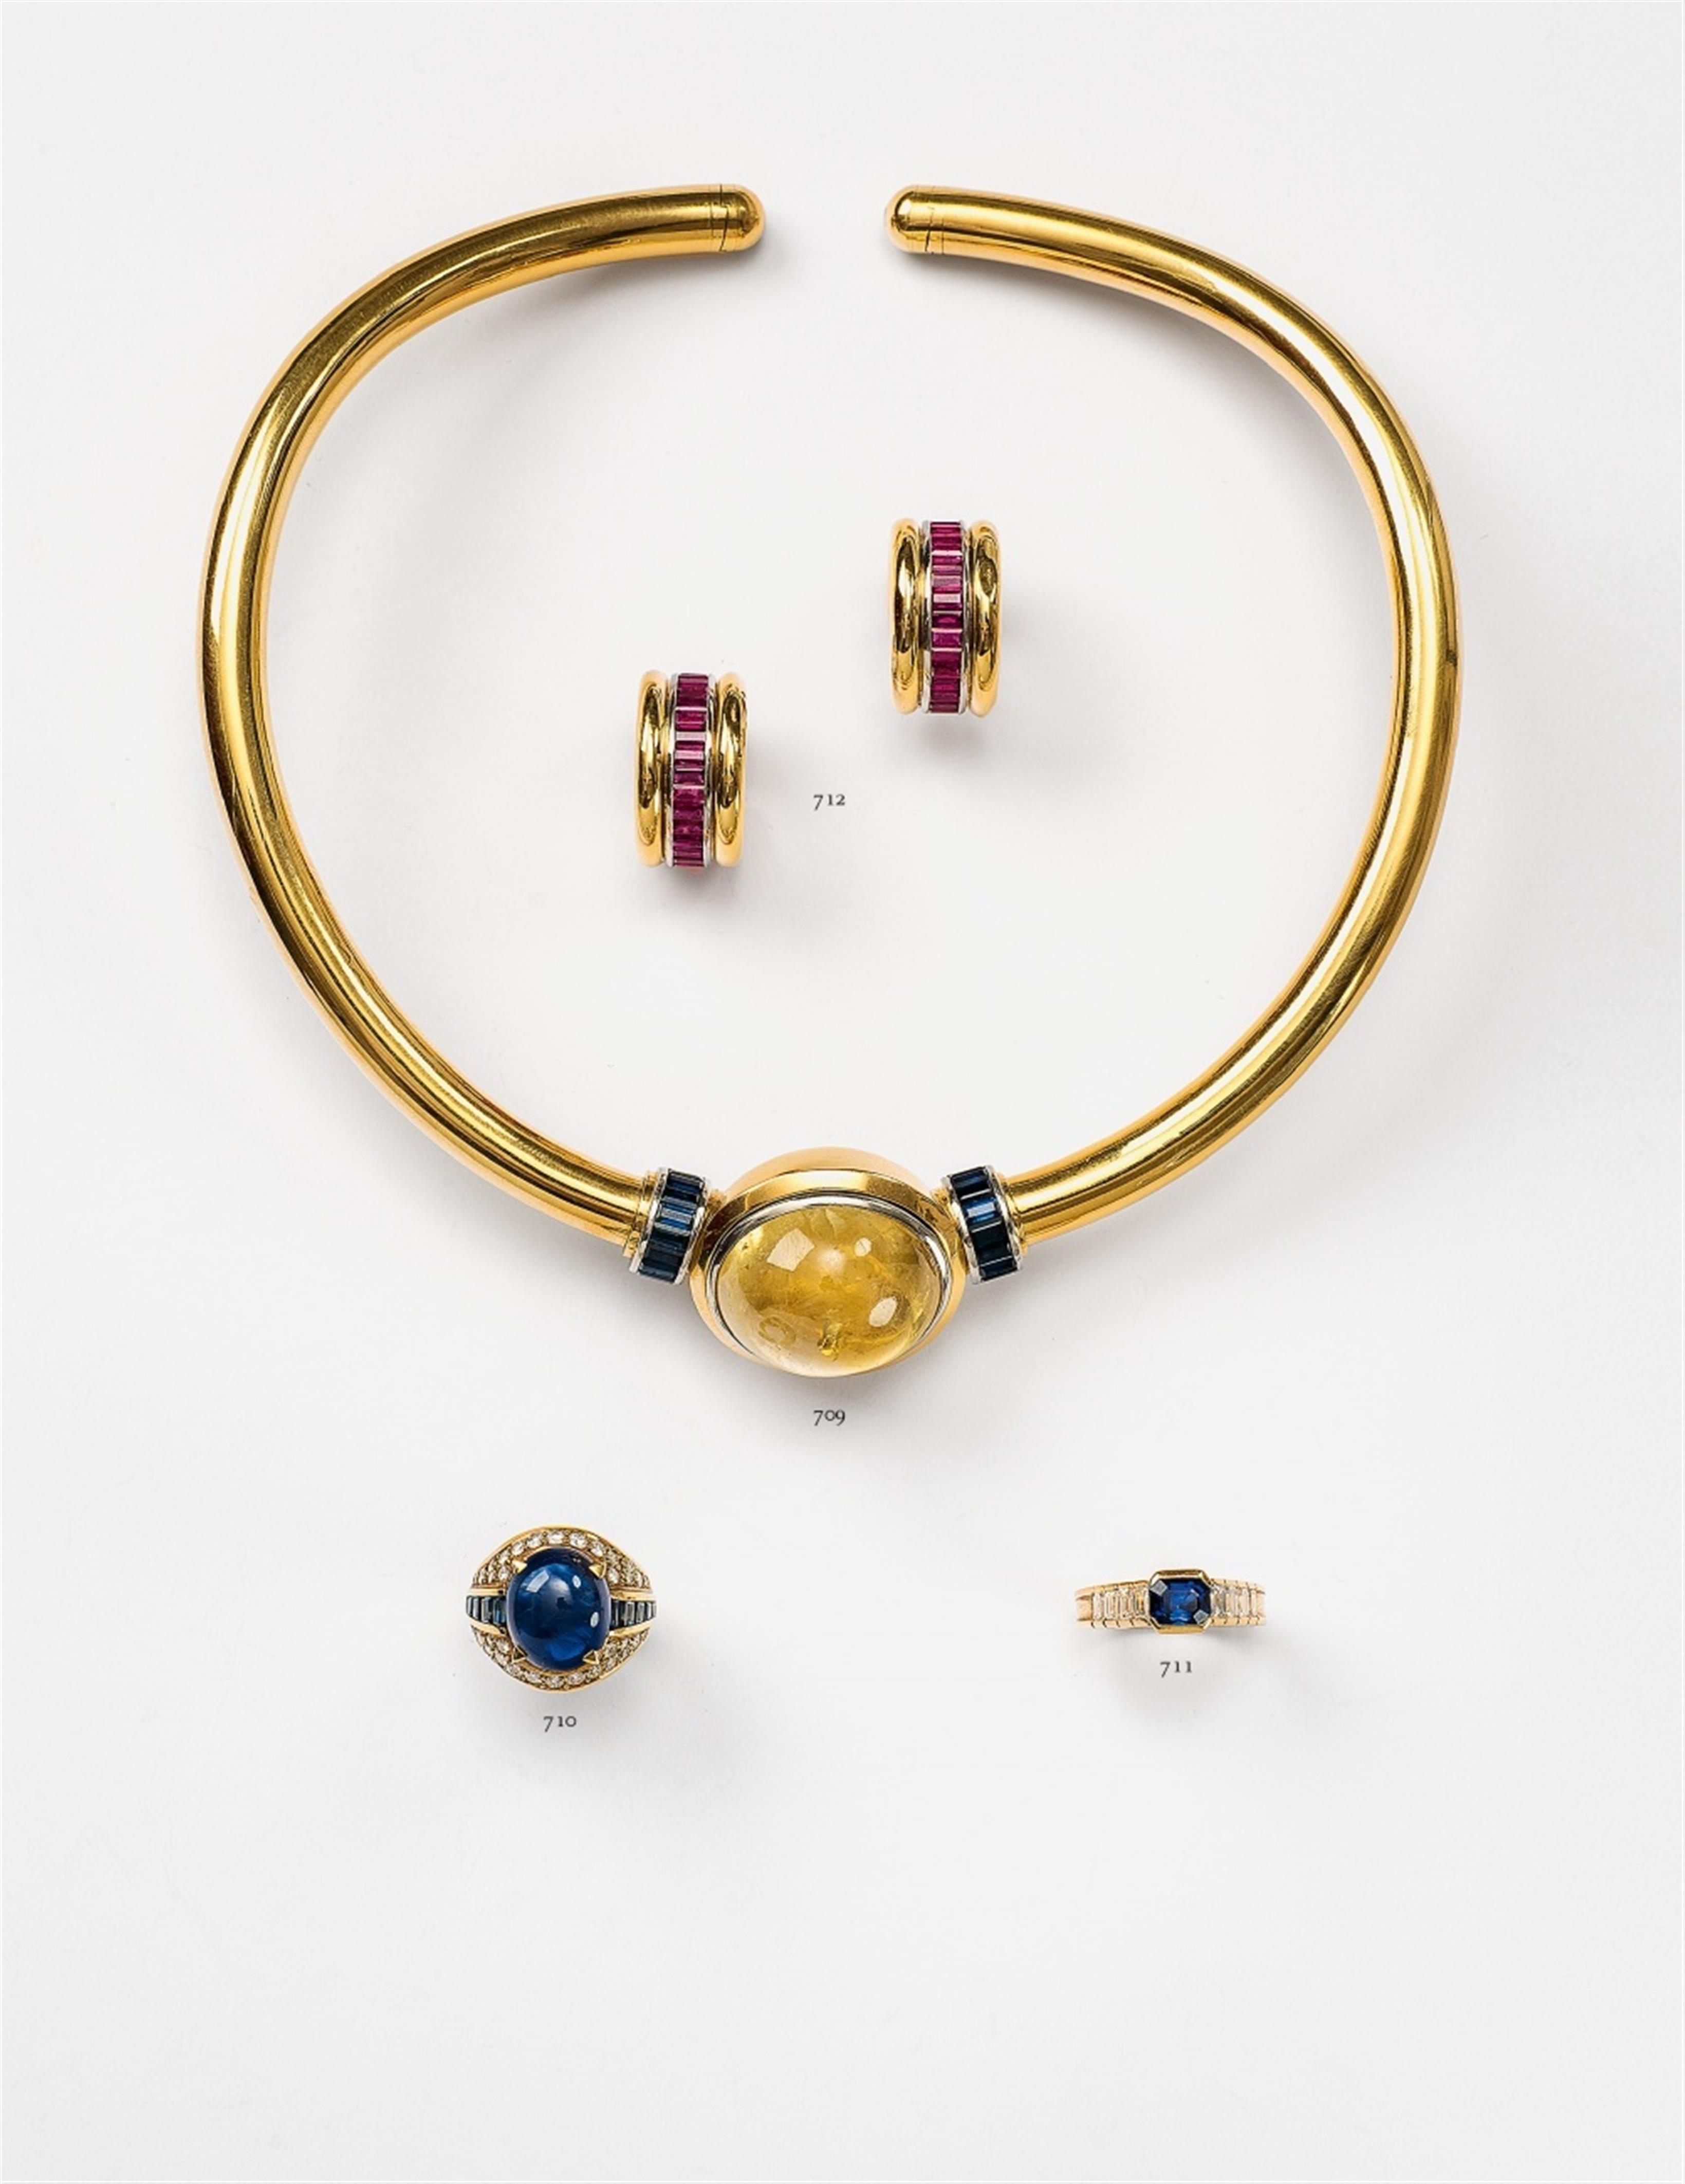 An 18k gold, platinum, and sapphire necklace - image-2